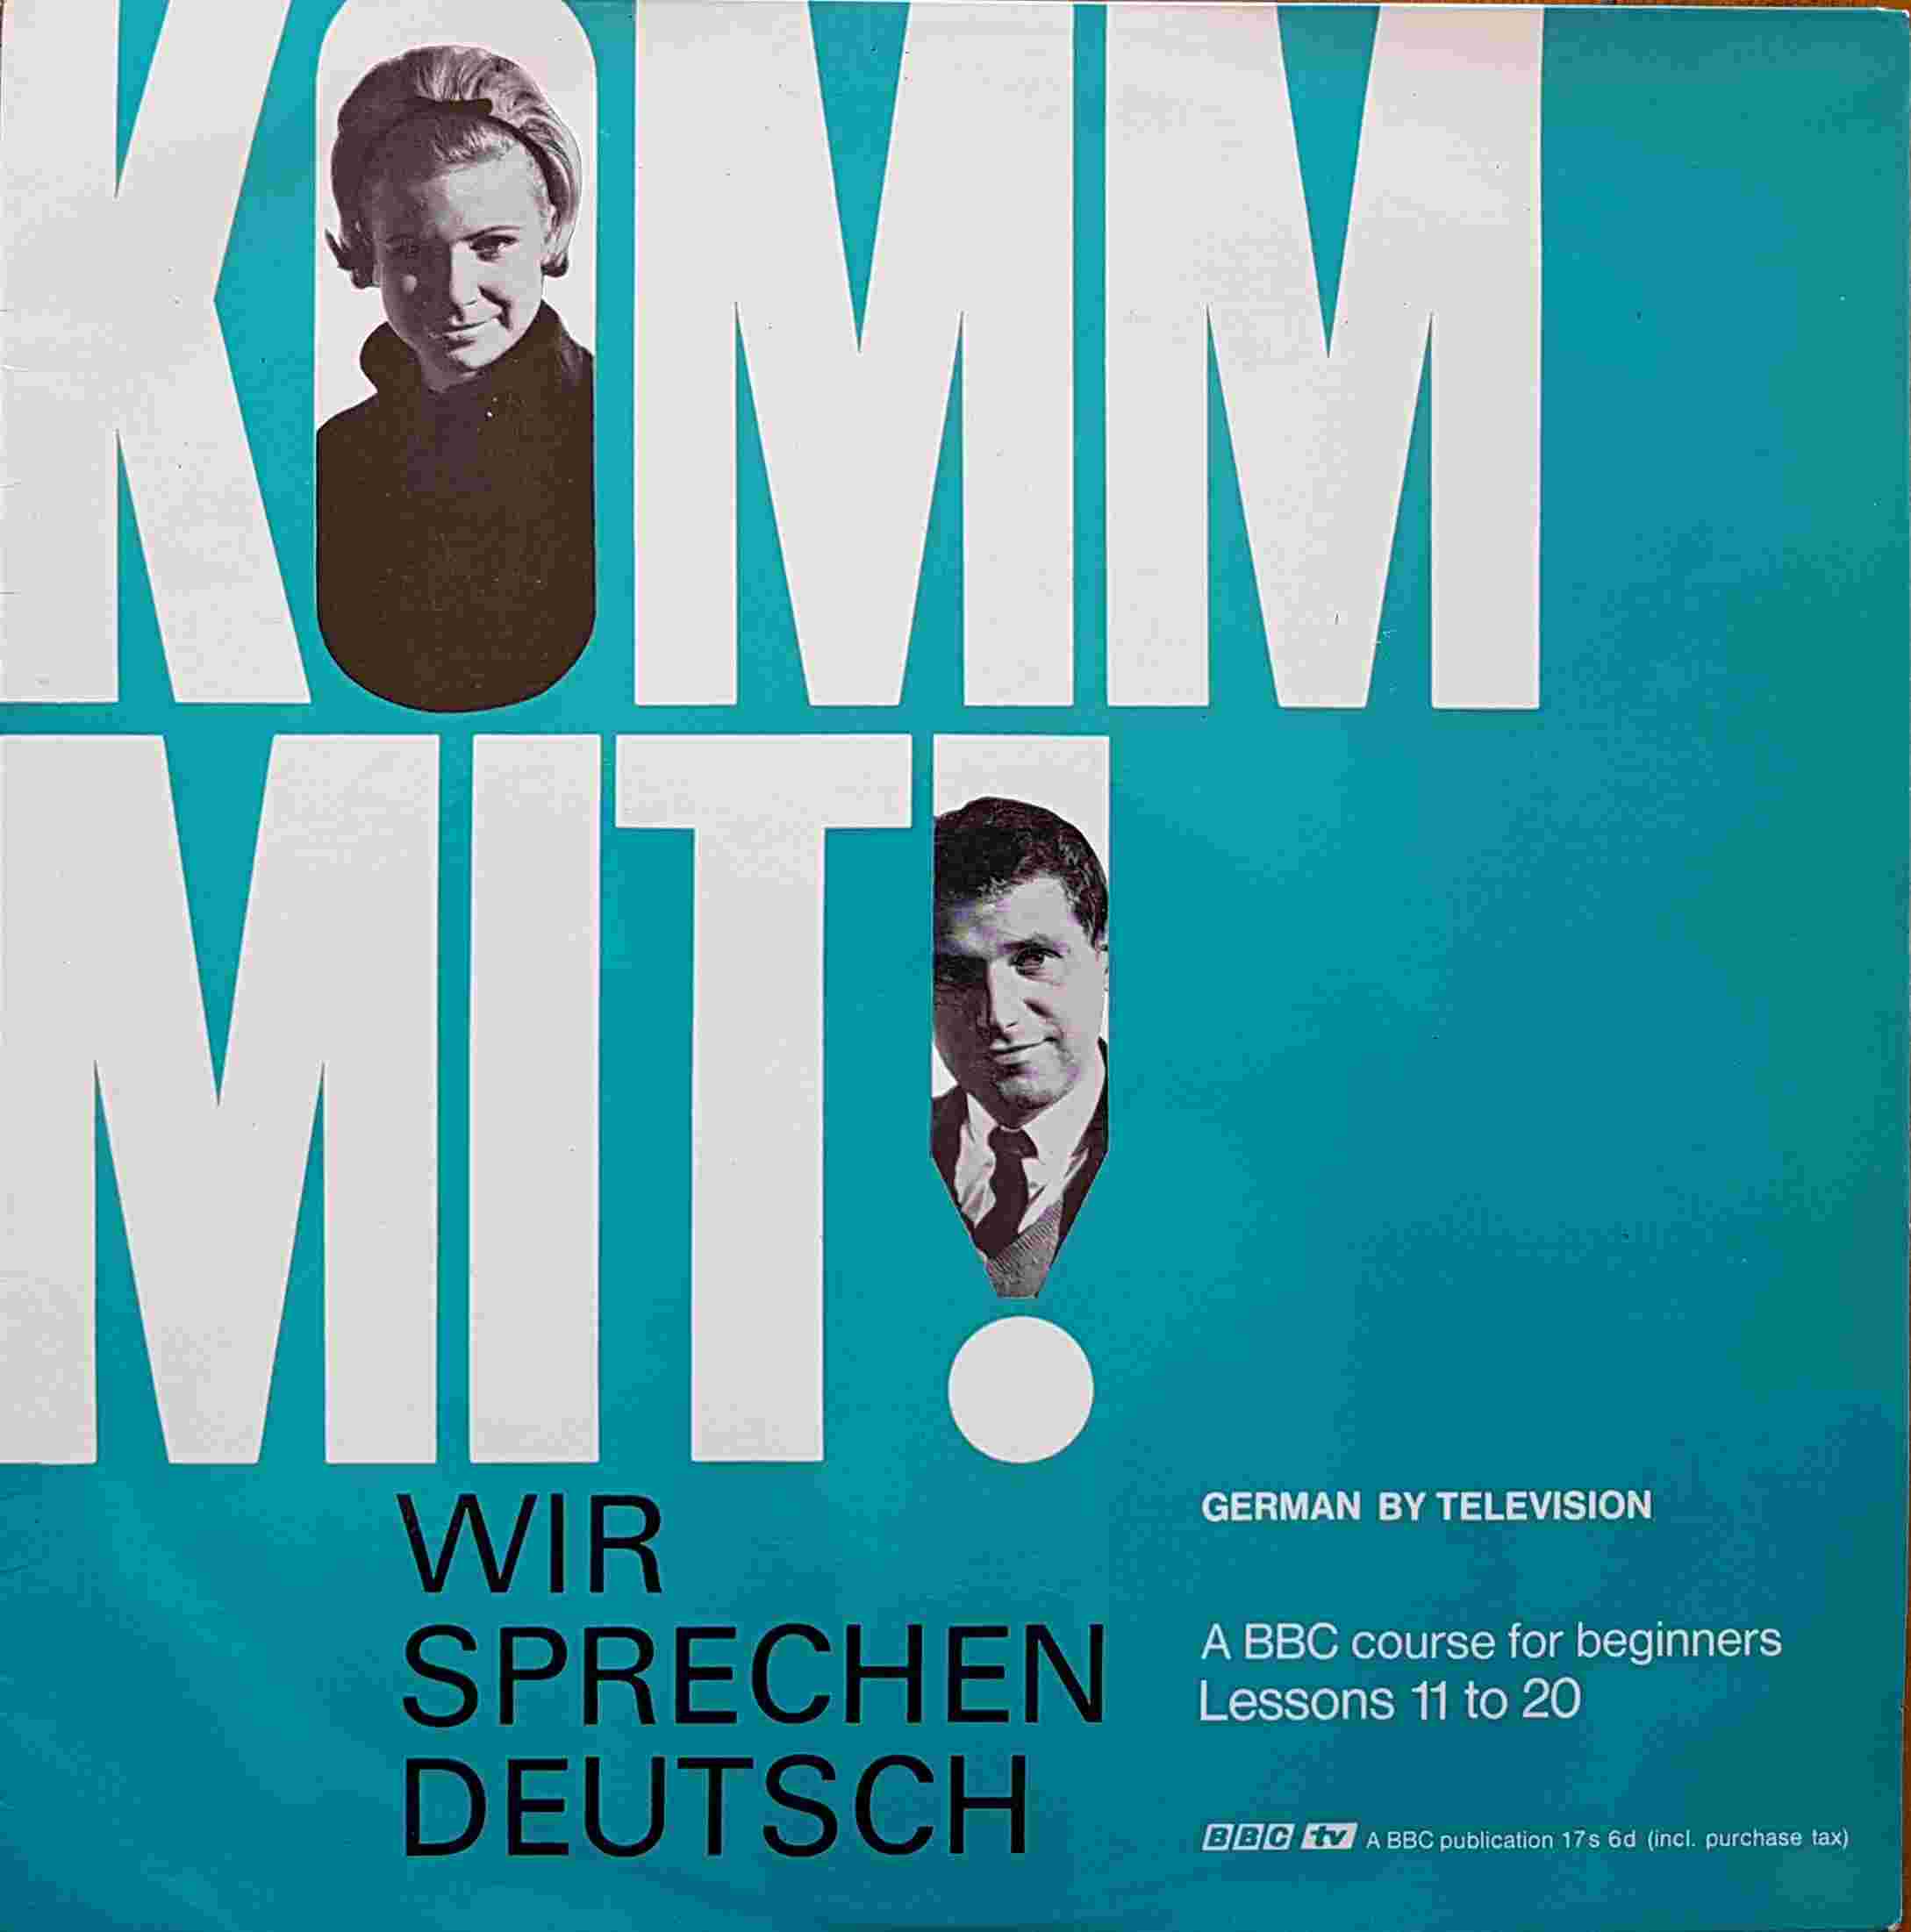 Picture of OP 11/12 Komm mit! Wir sprechen Deutsch - A BBC course for beginners lessons 11 - 20 by artist John L. M. Trim / Frank Kuna from the BBC albums - Records and Tapes library